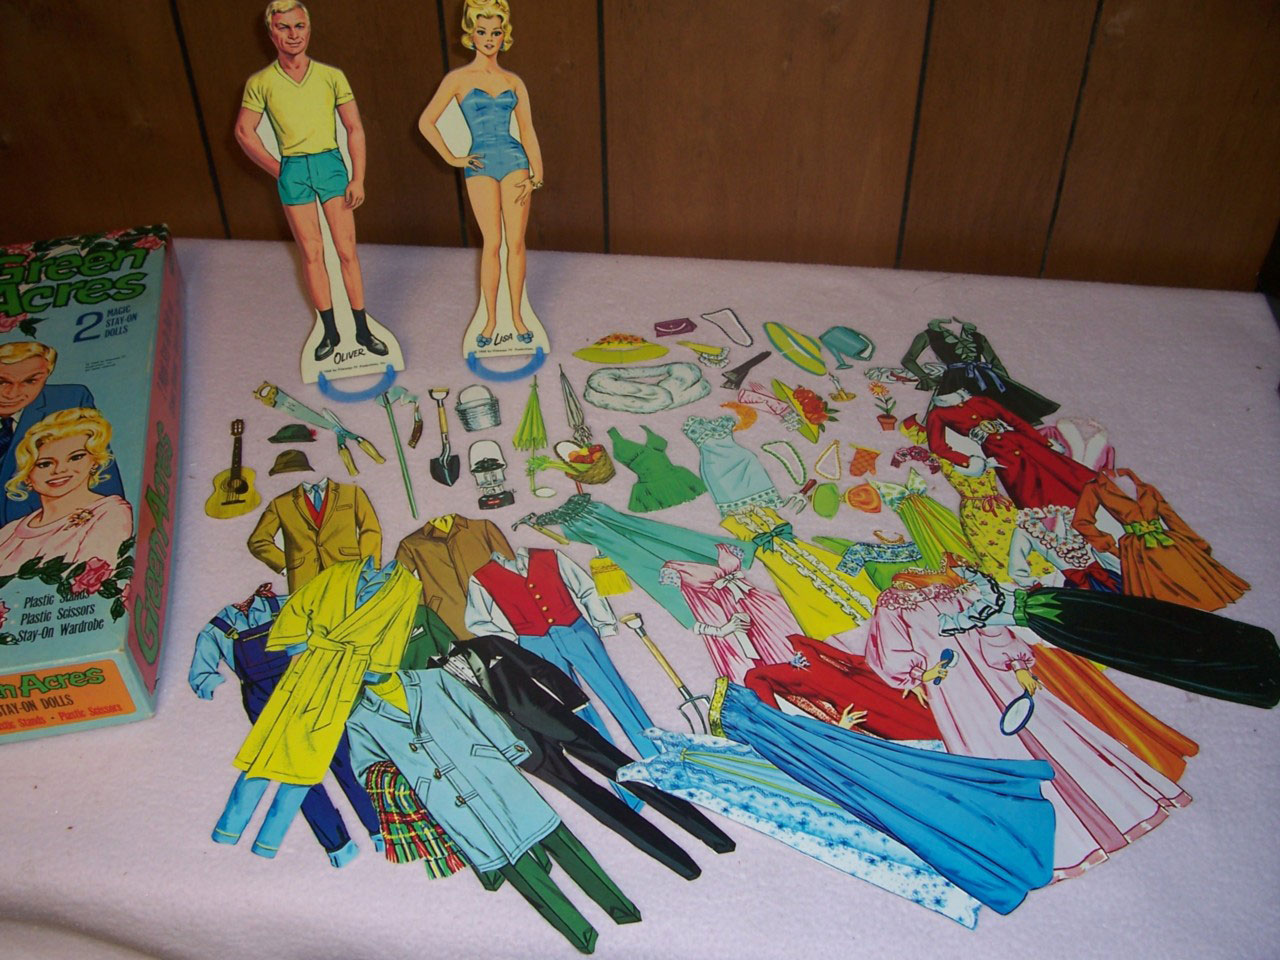 A paper doll set produced by Whitman in 1968